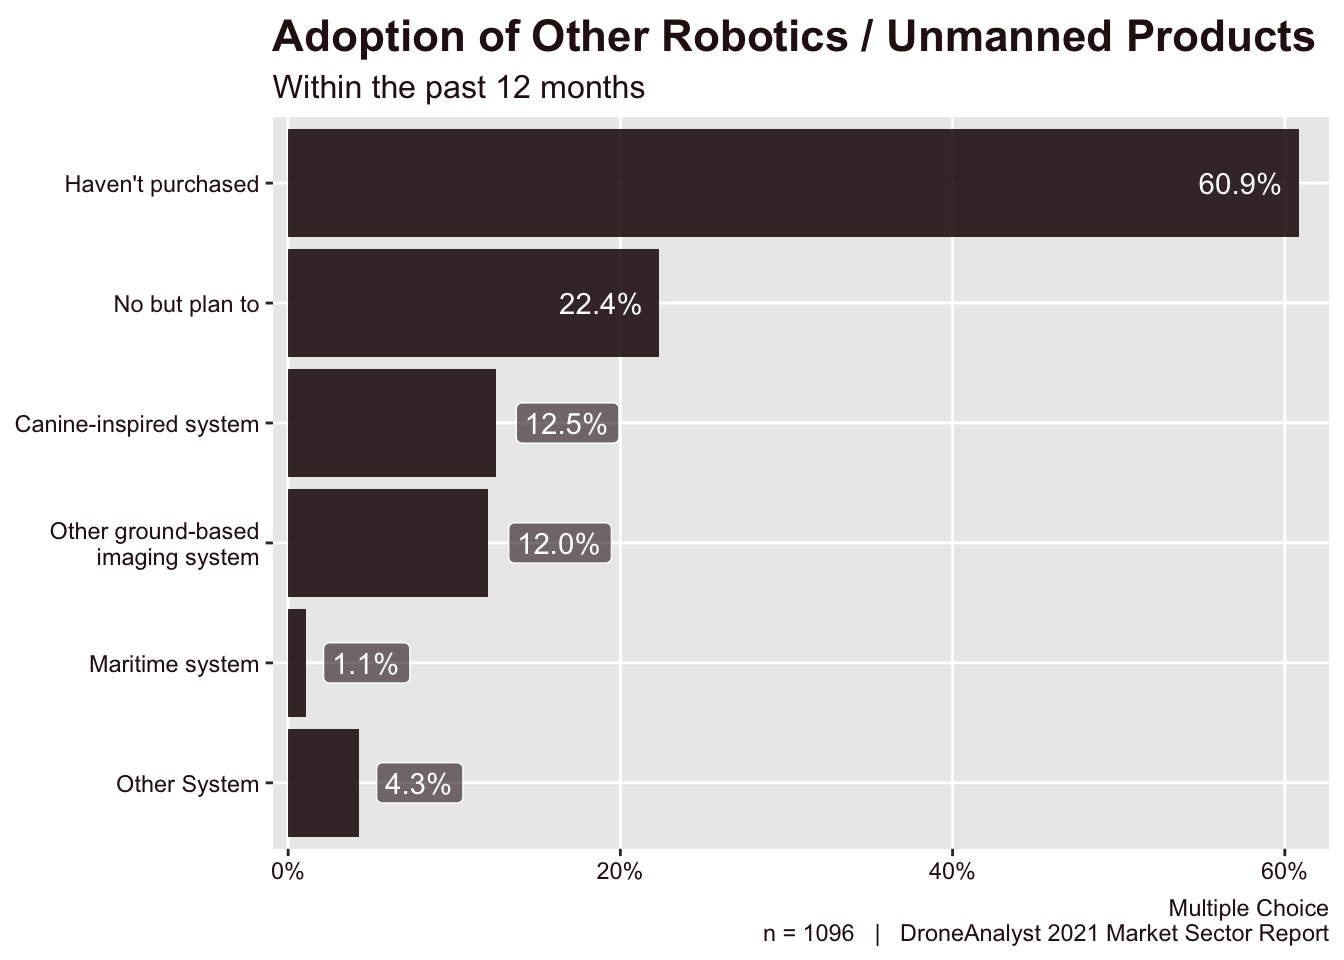 Adoption of Other Robotics / Unmanned Products